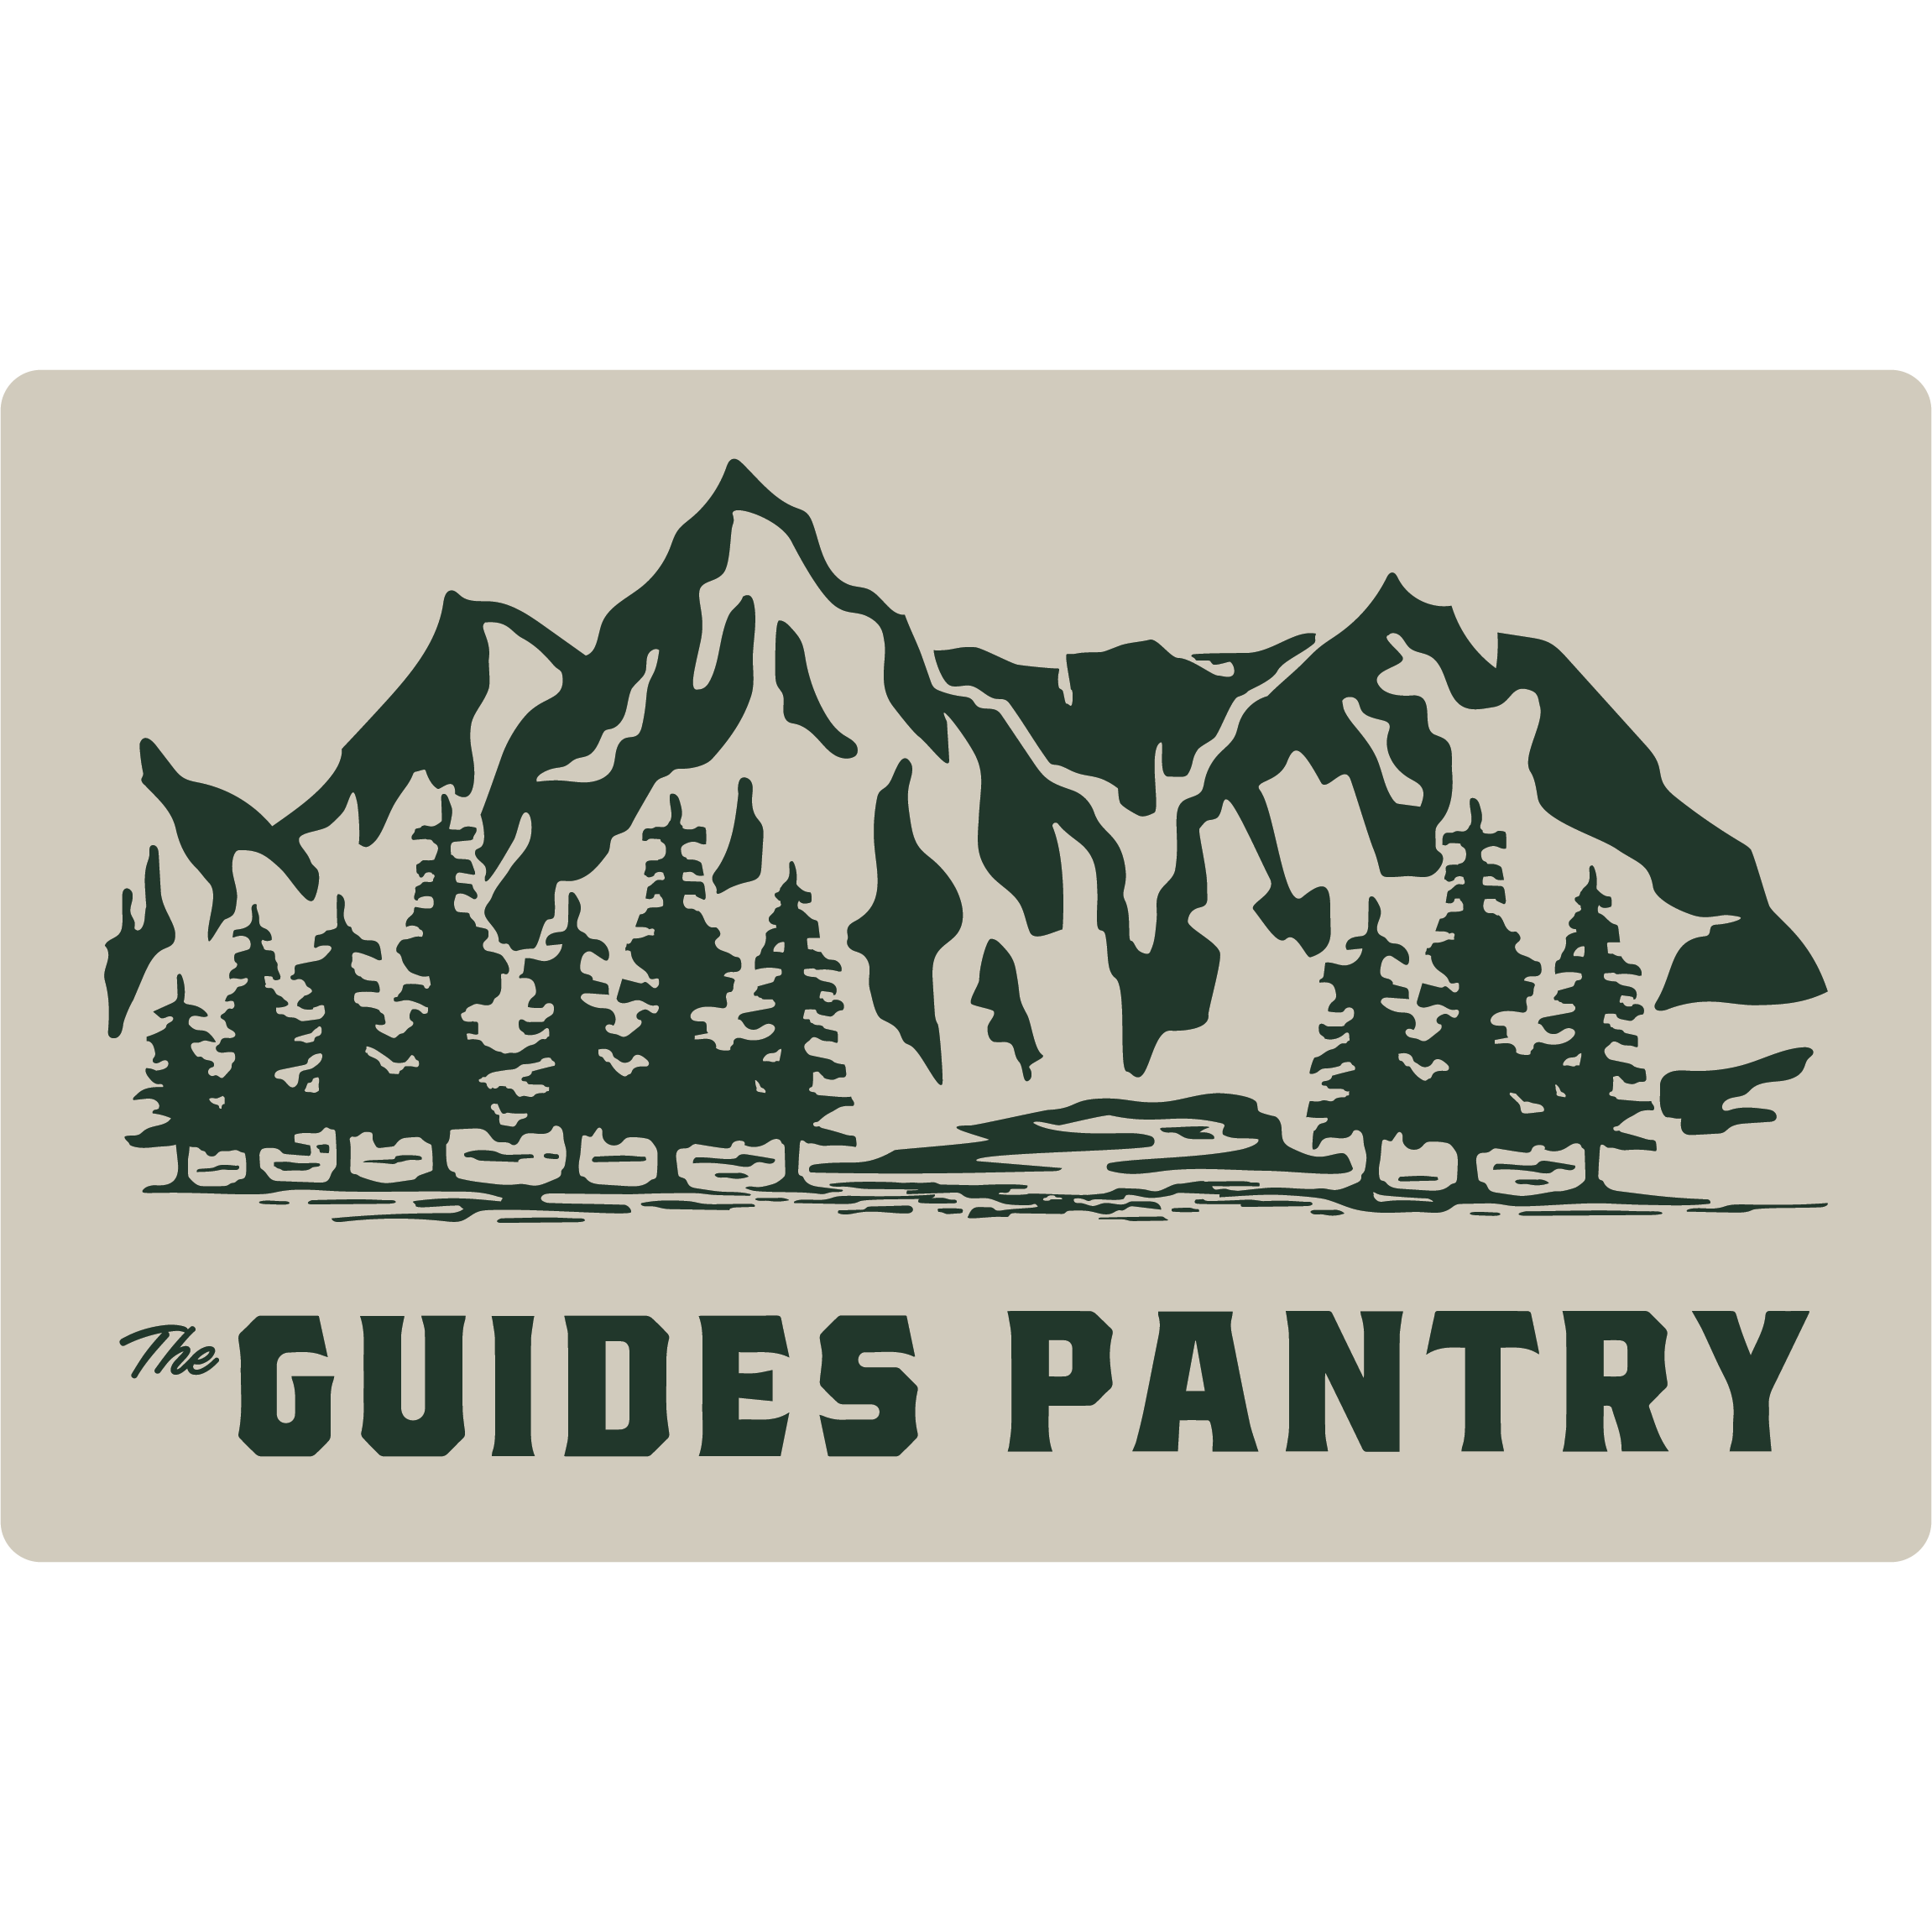 The Guide's Pantry